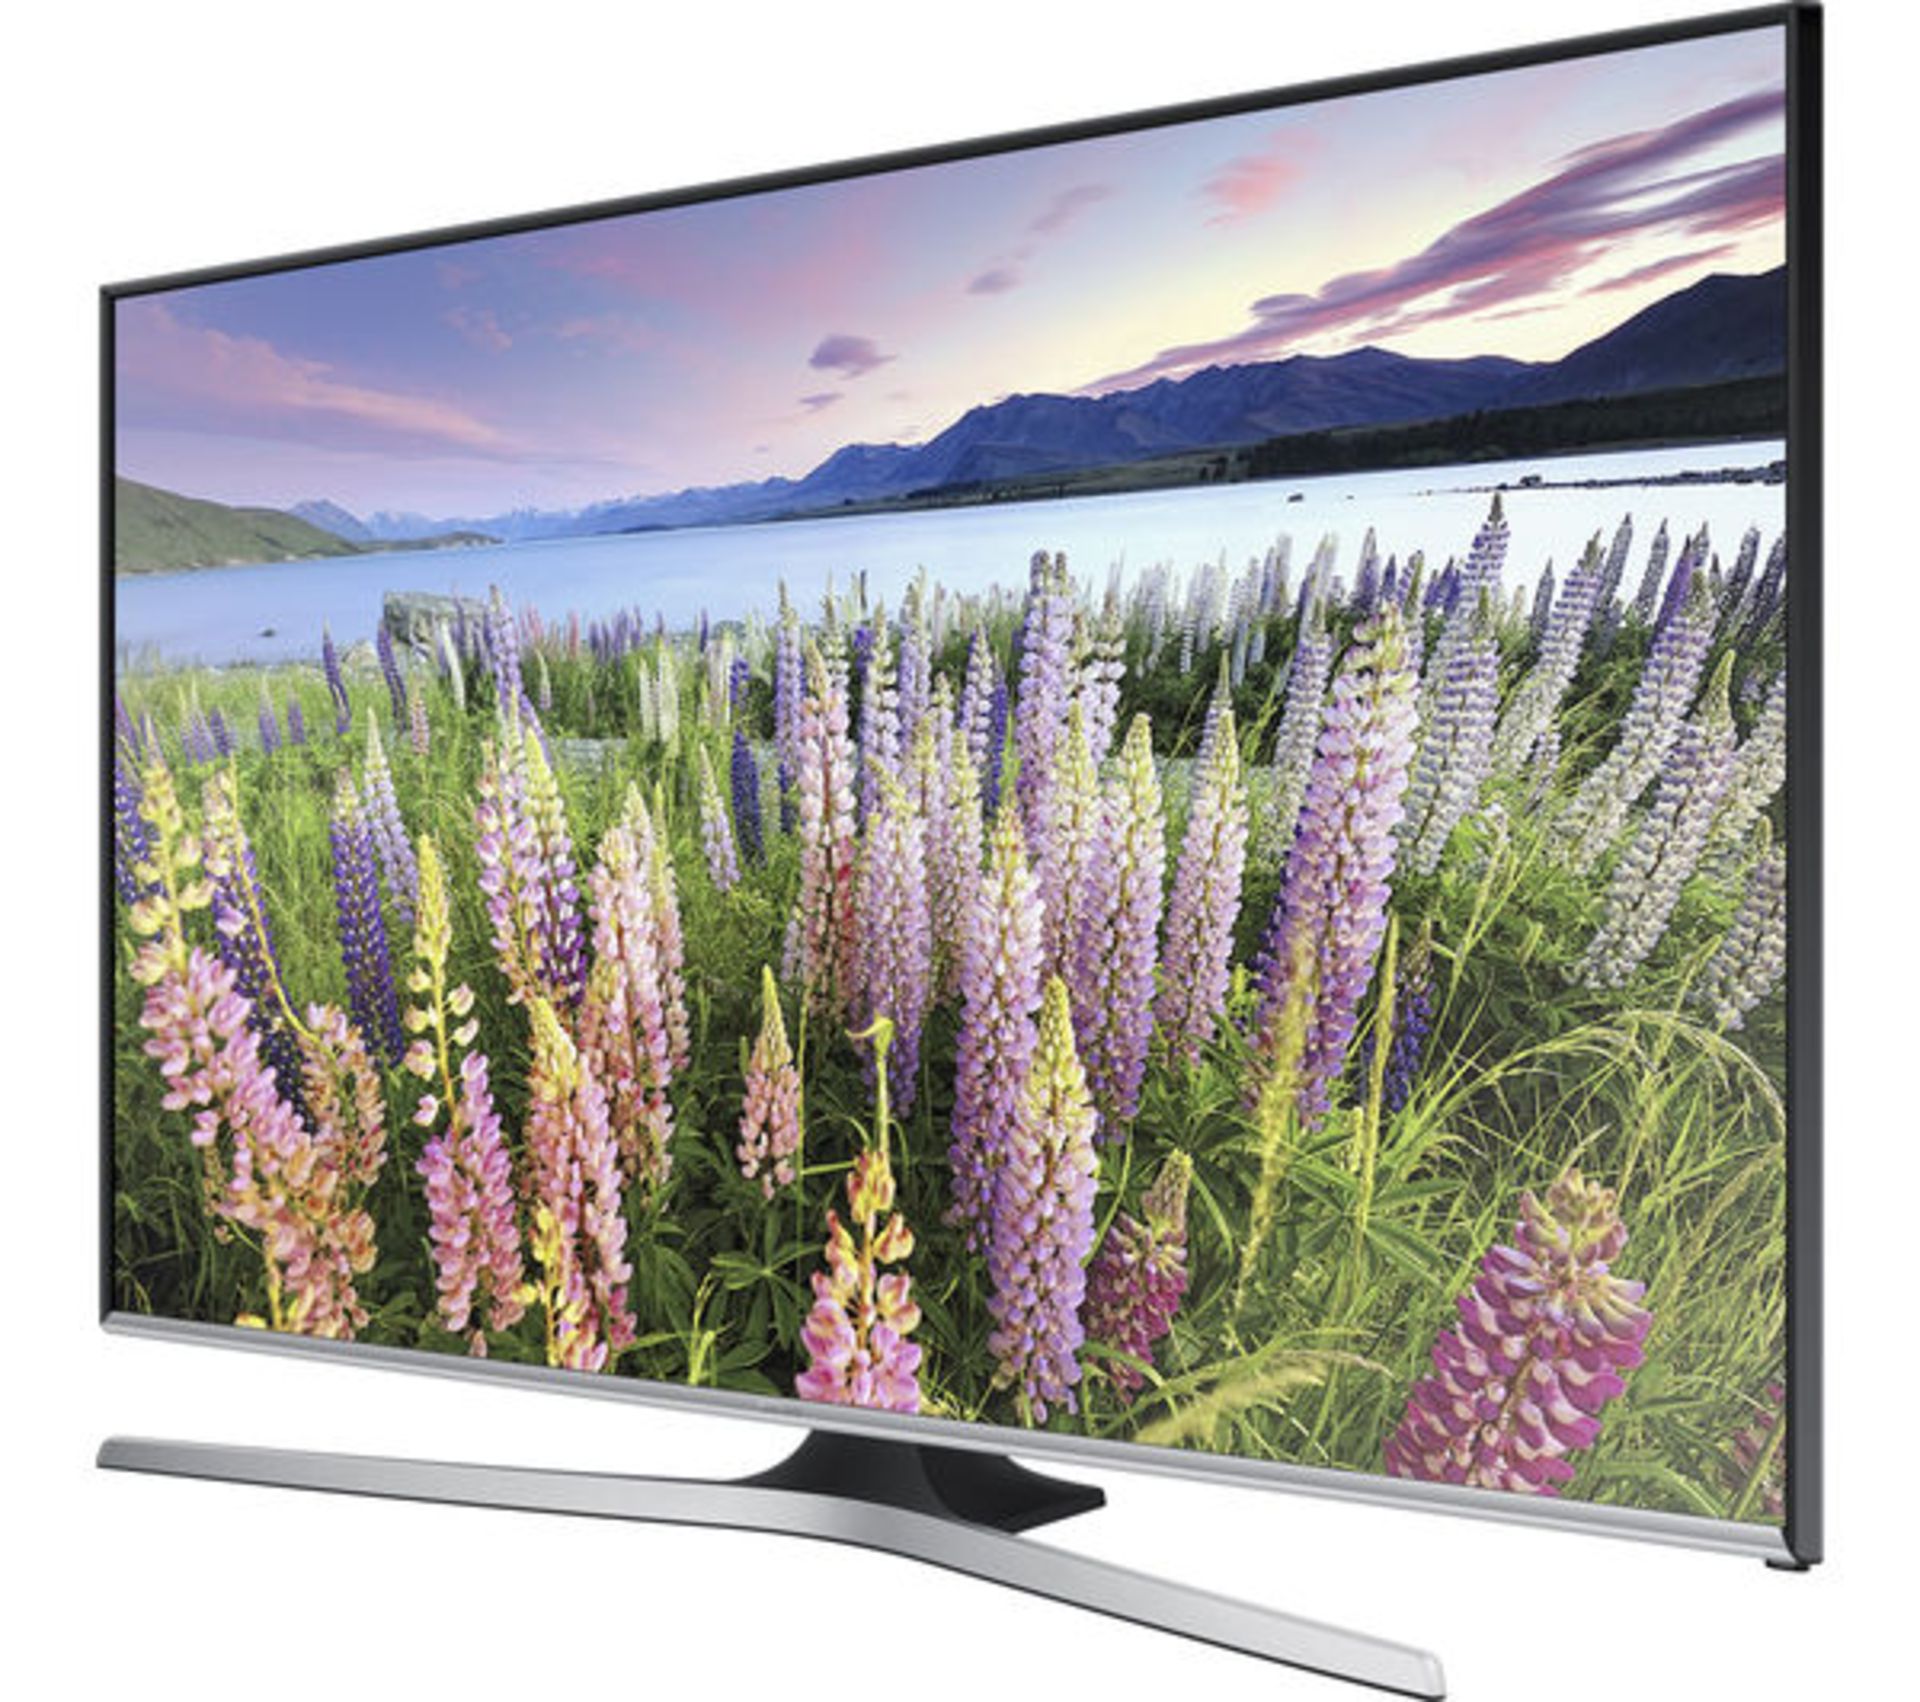 V Grade A Samsung 32" Widescreen Full HD 1080p LED LCD Smart TV - Freeview HD - Built in Wi-Fi - Lan